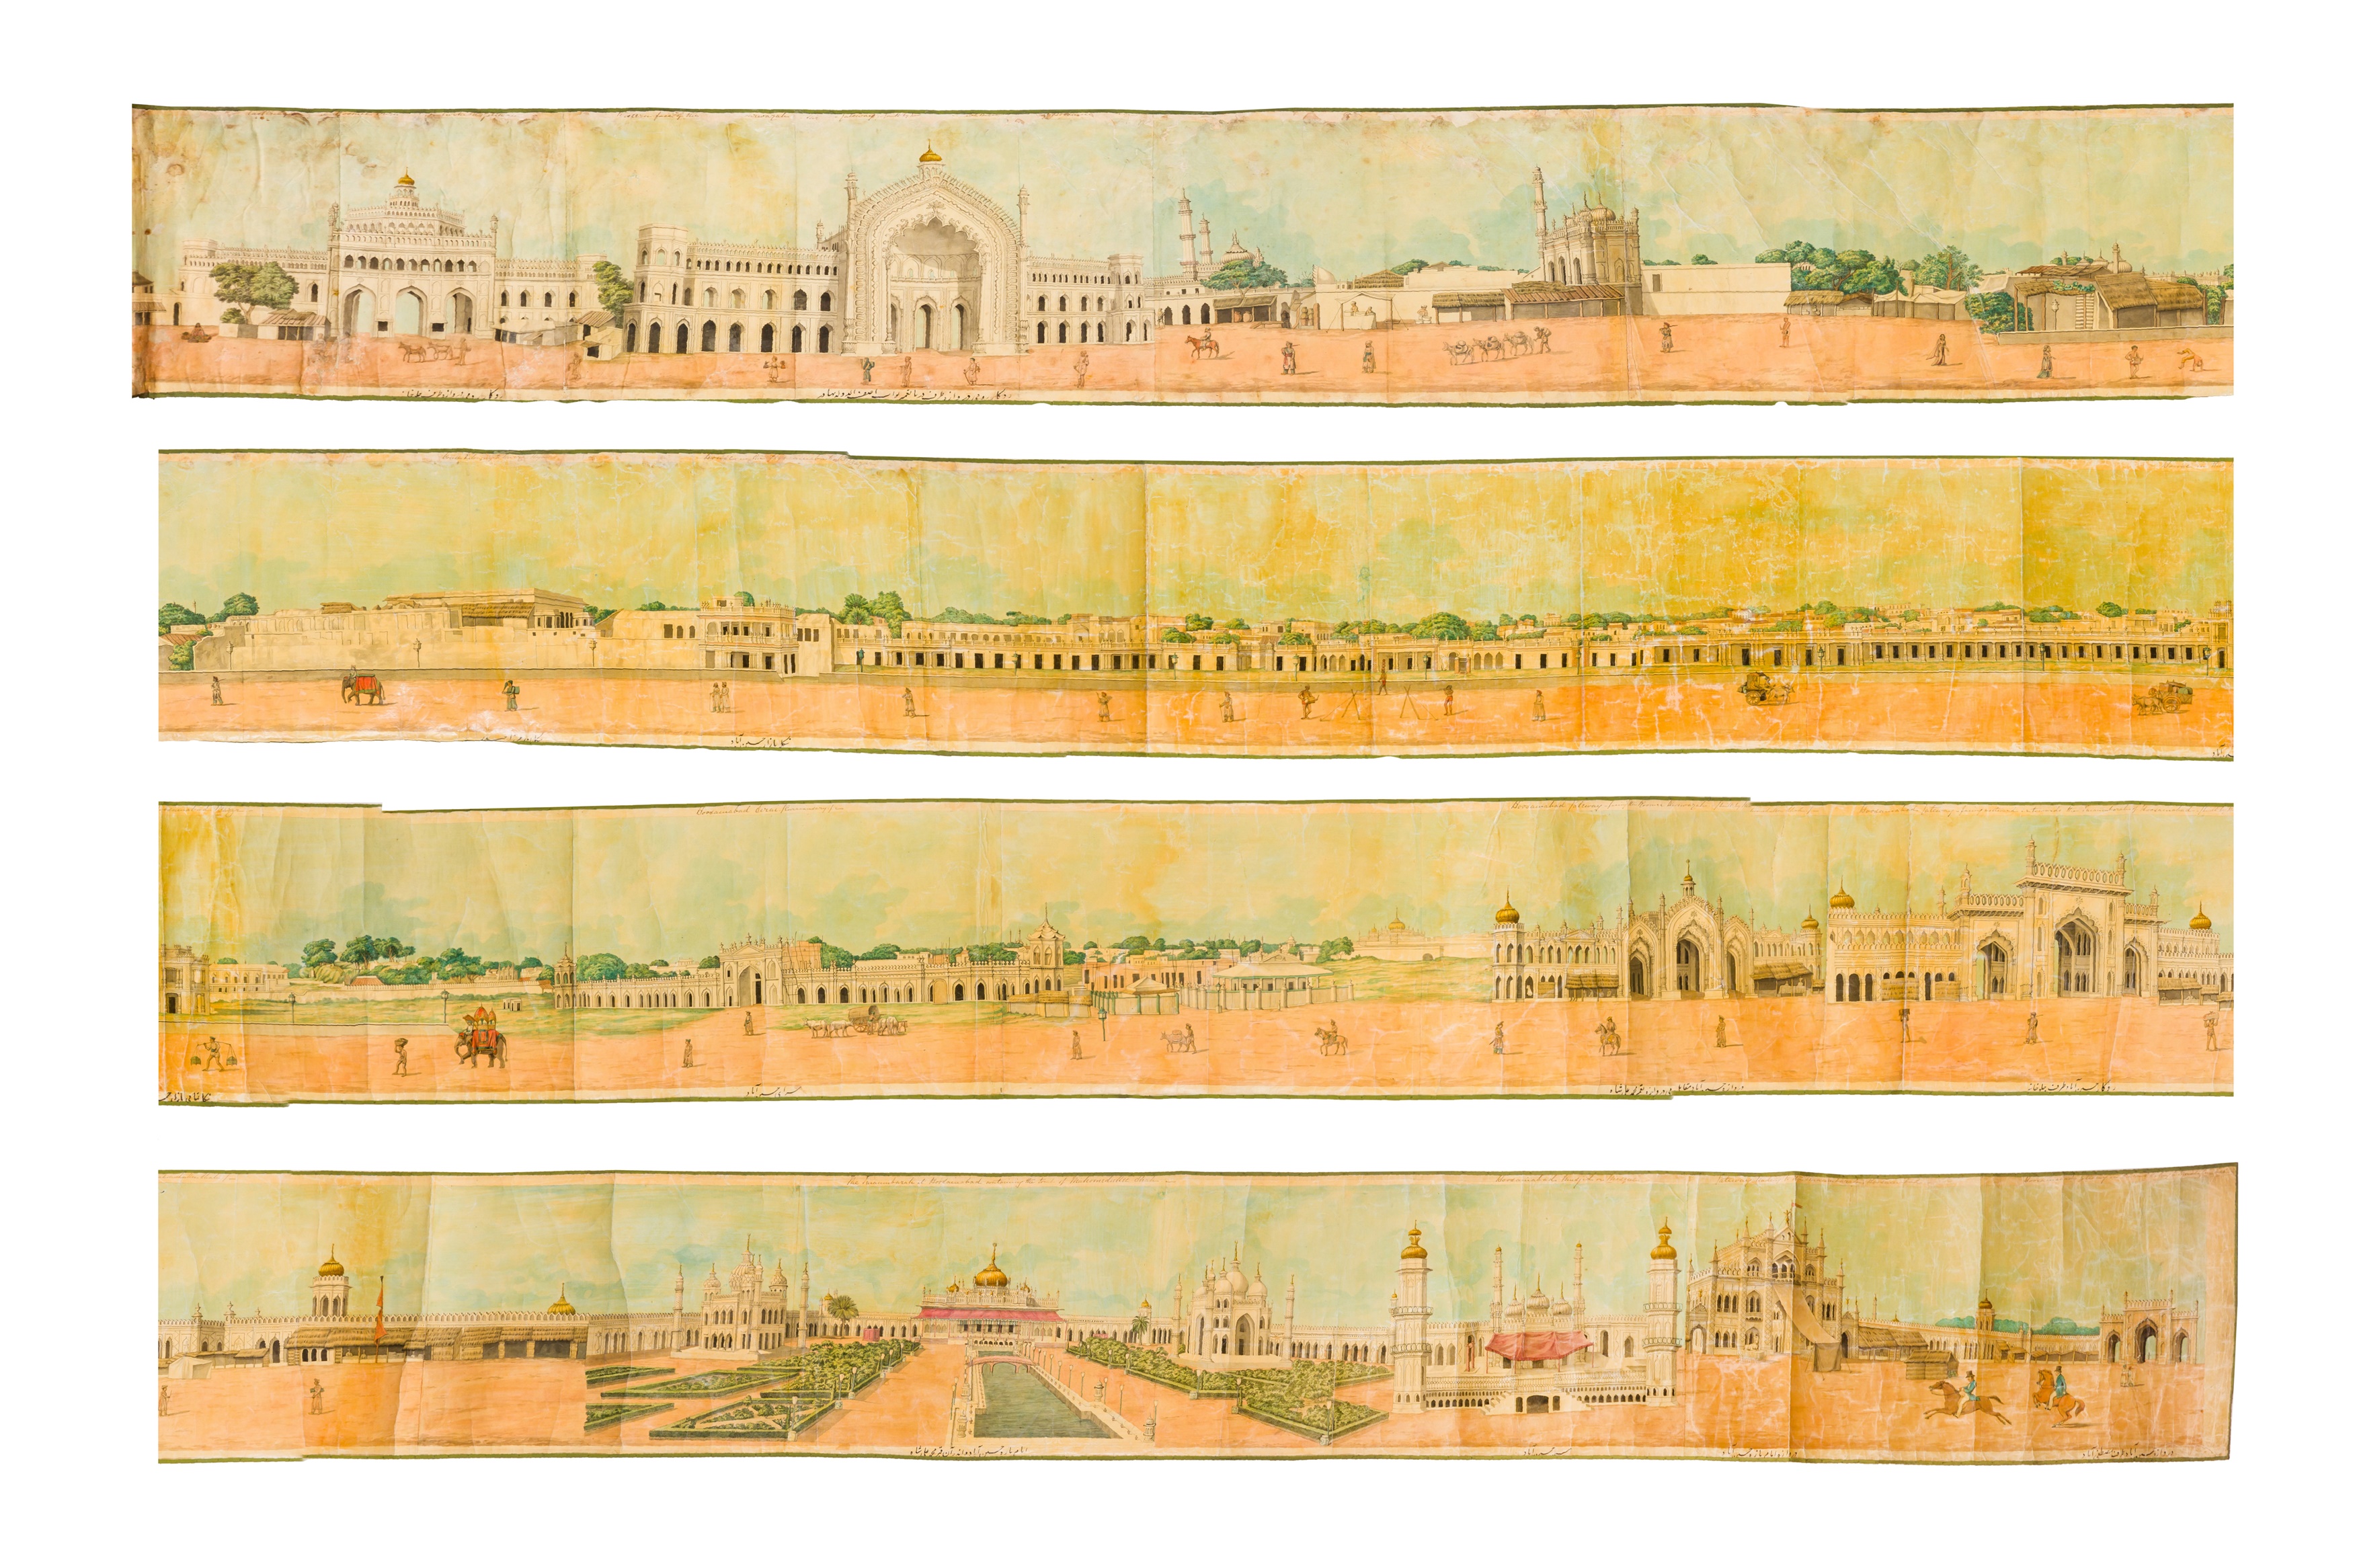 An Illustrated Scroll depicting the Hussainabad Imambara Complex. India, Company School, Lucknow, c.